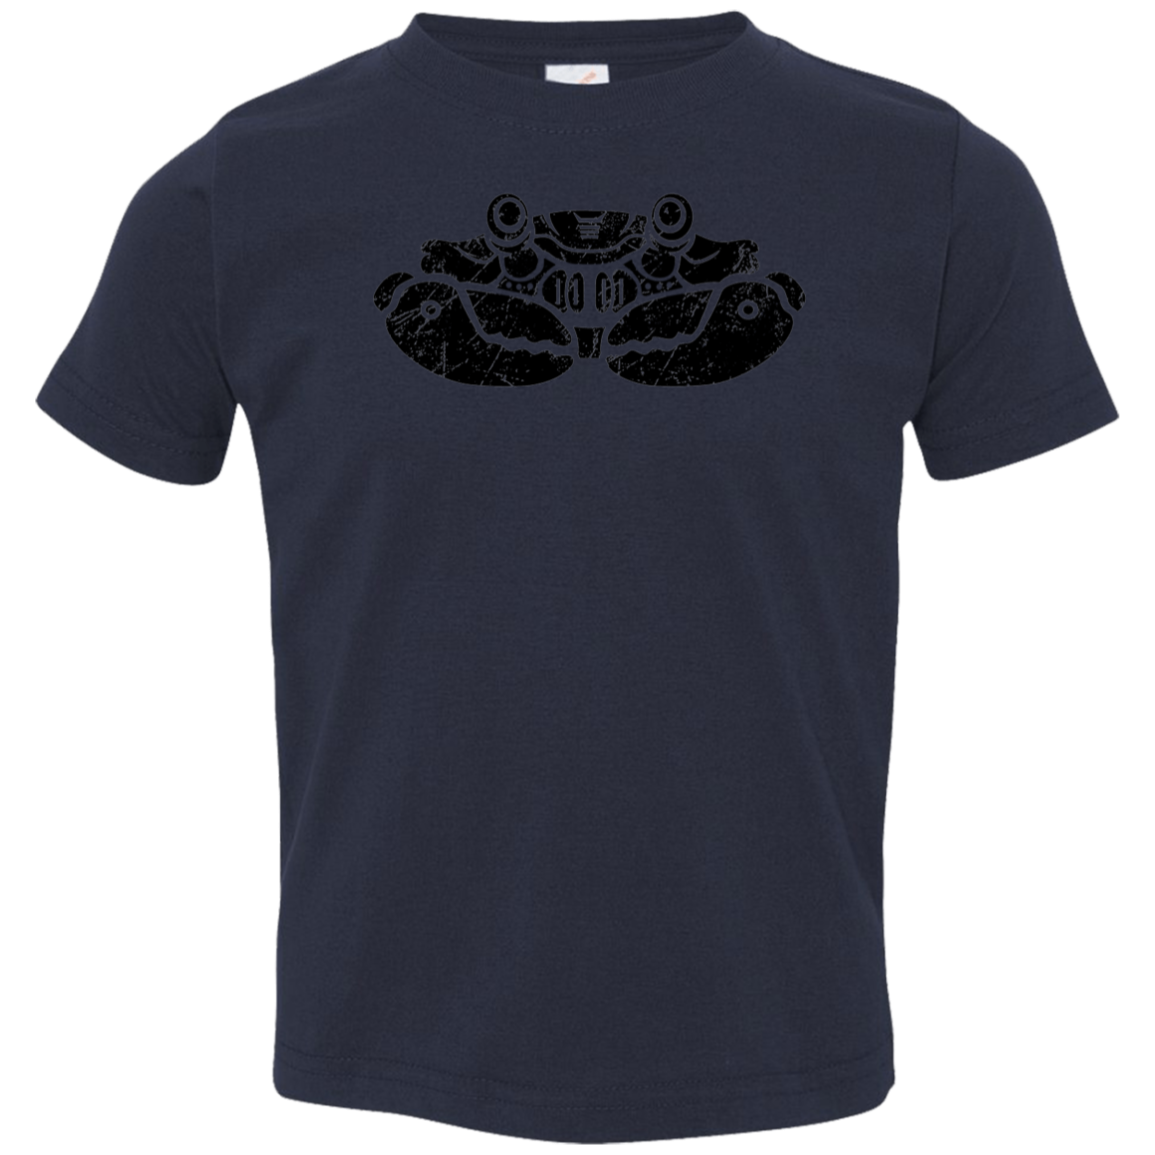 Black Distressed Emblem T-Shirt for Toddlers (Crab/Clamps)